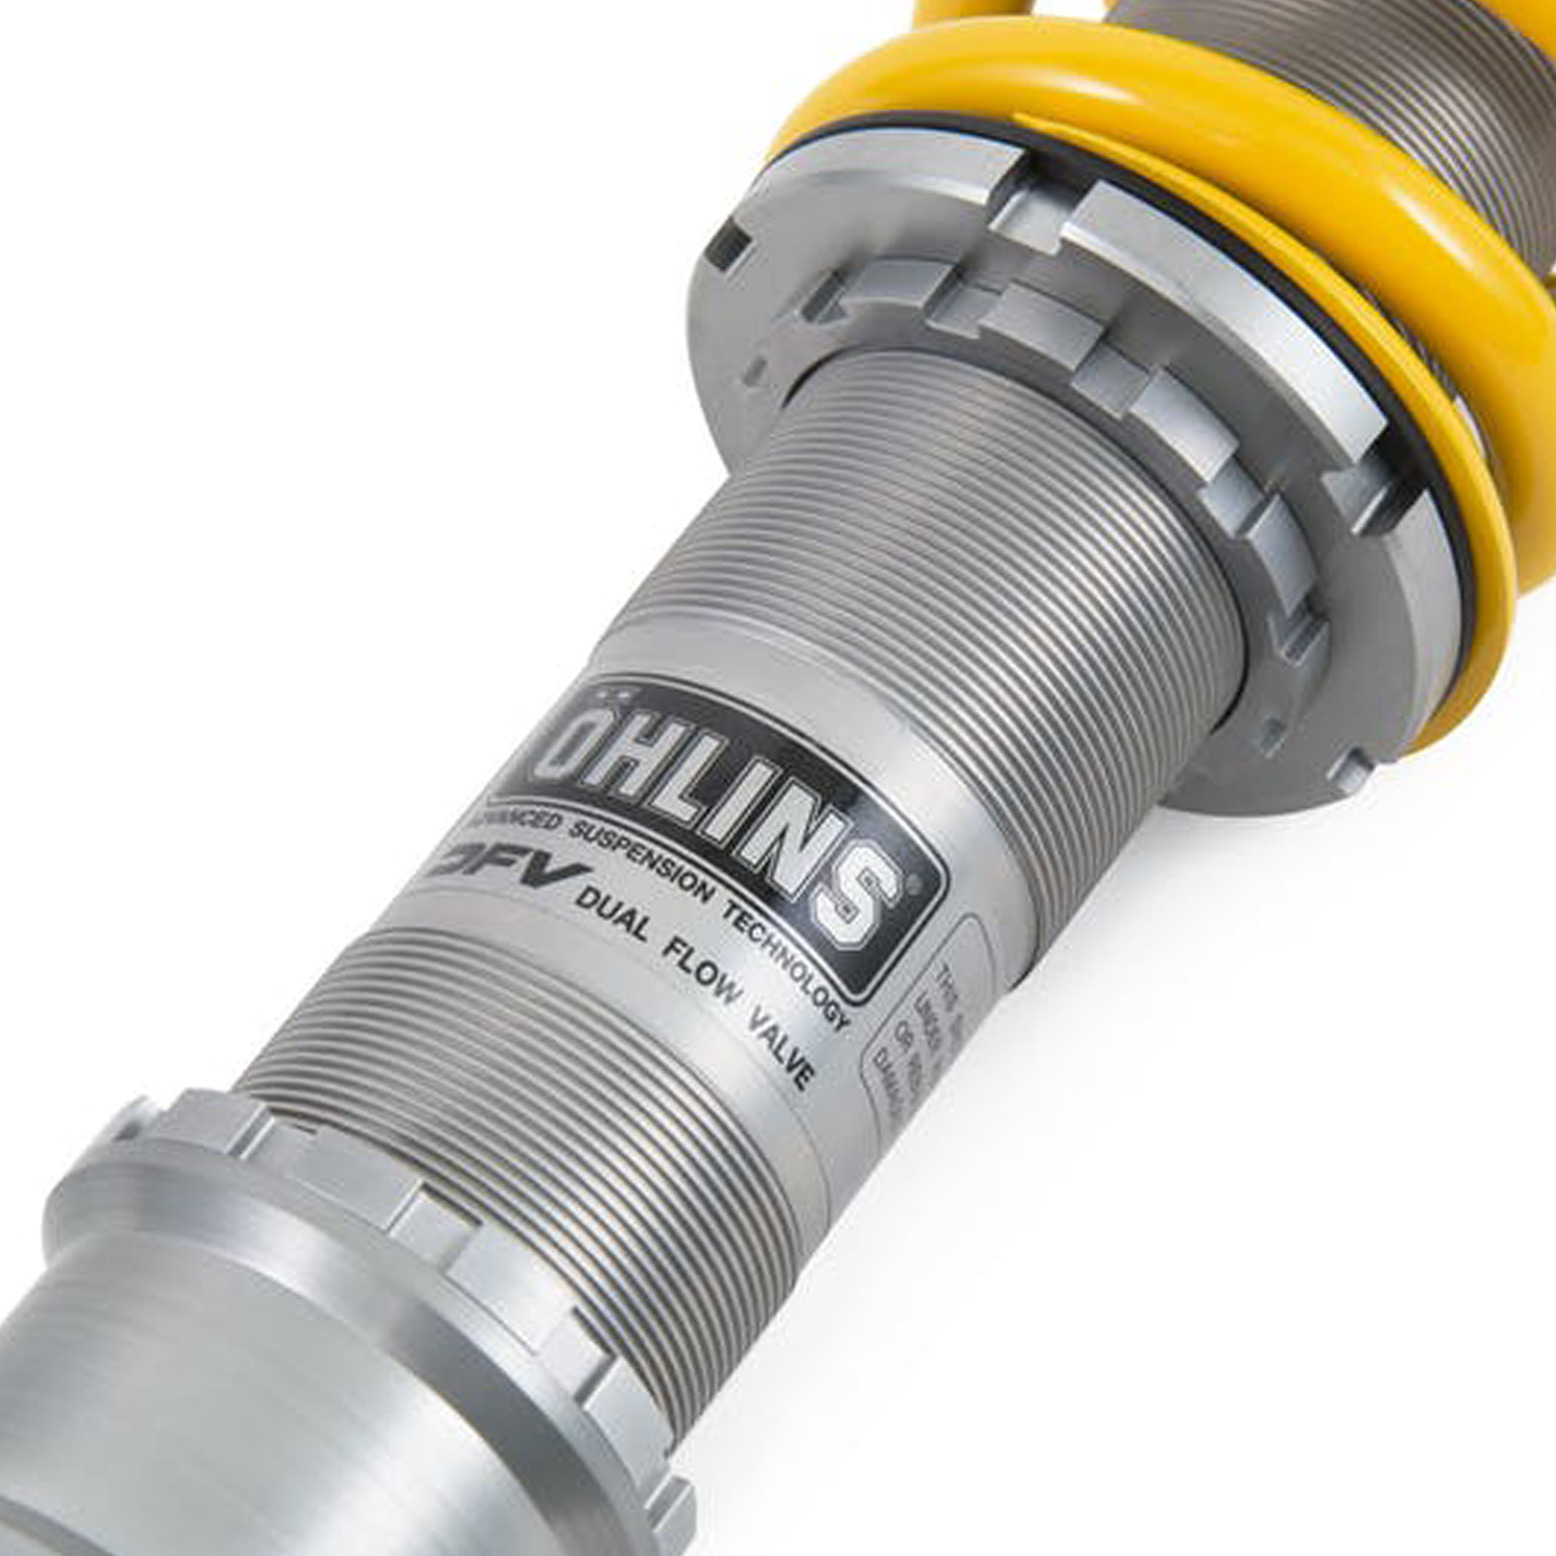 Porsche Ohlins Road and Track Coilovers 2006-2012 Cayman, 2005-2012 Boxster